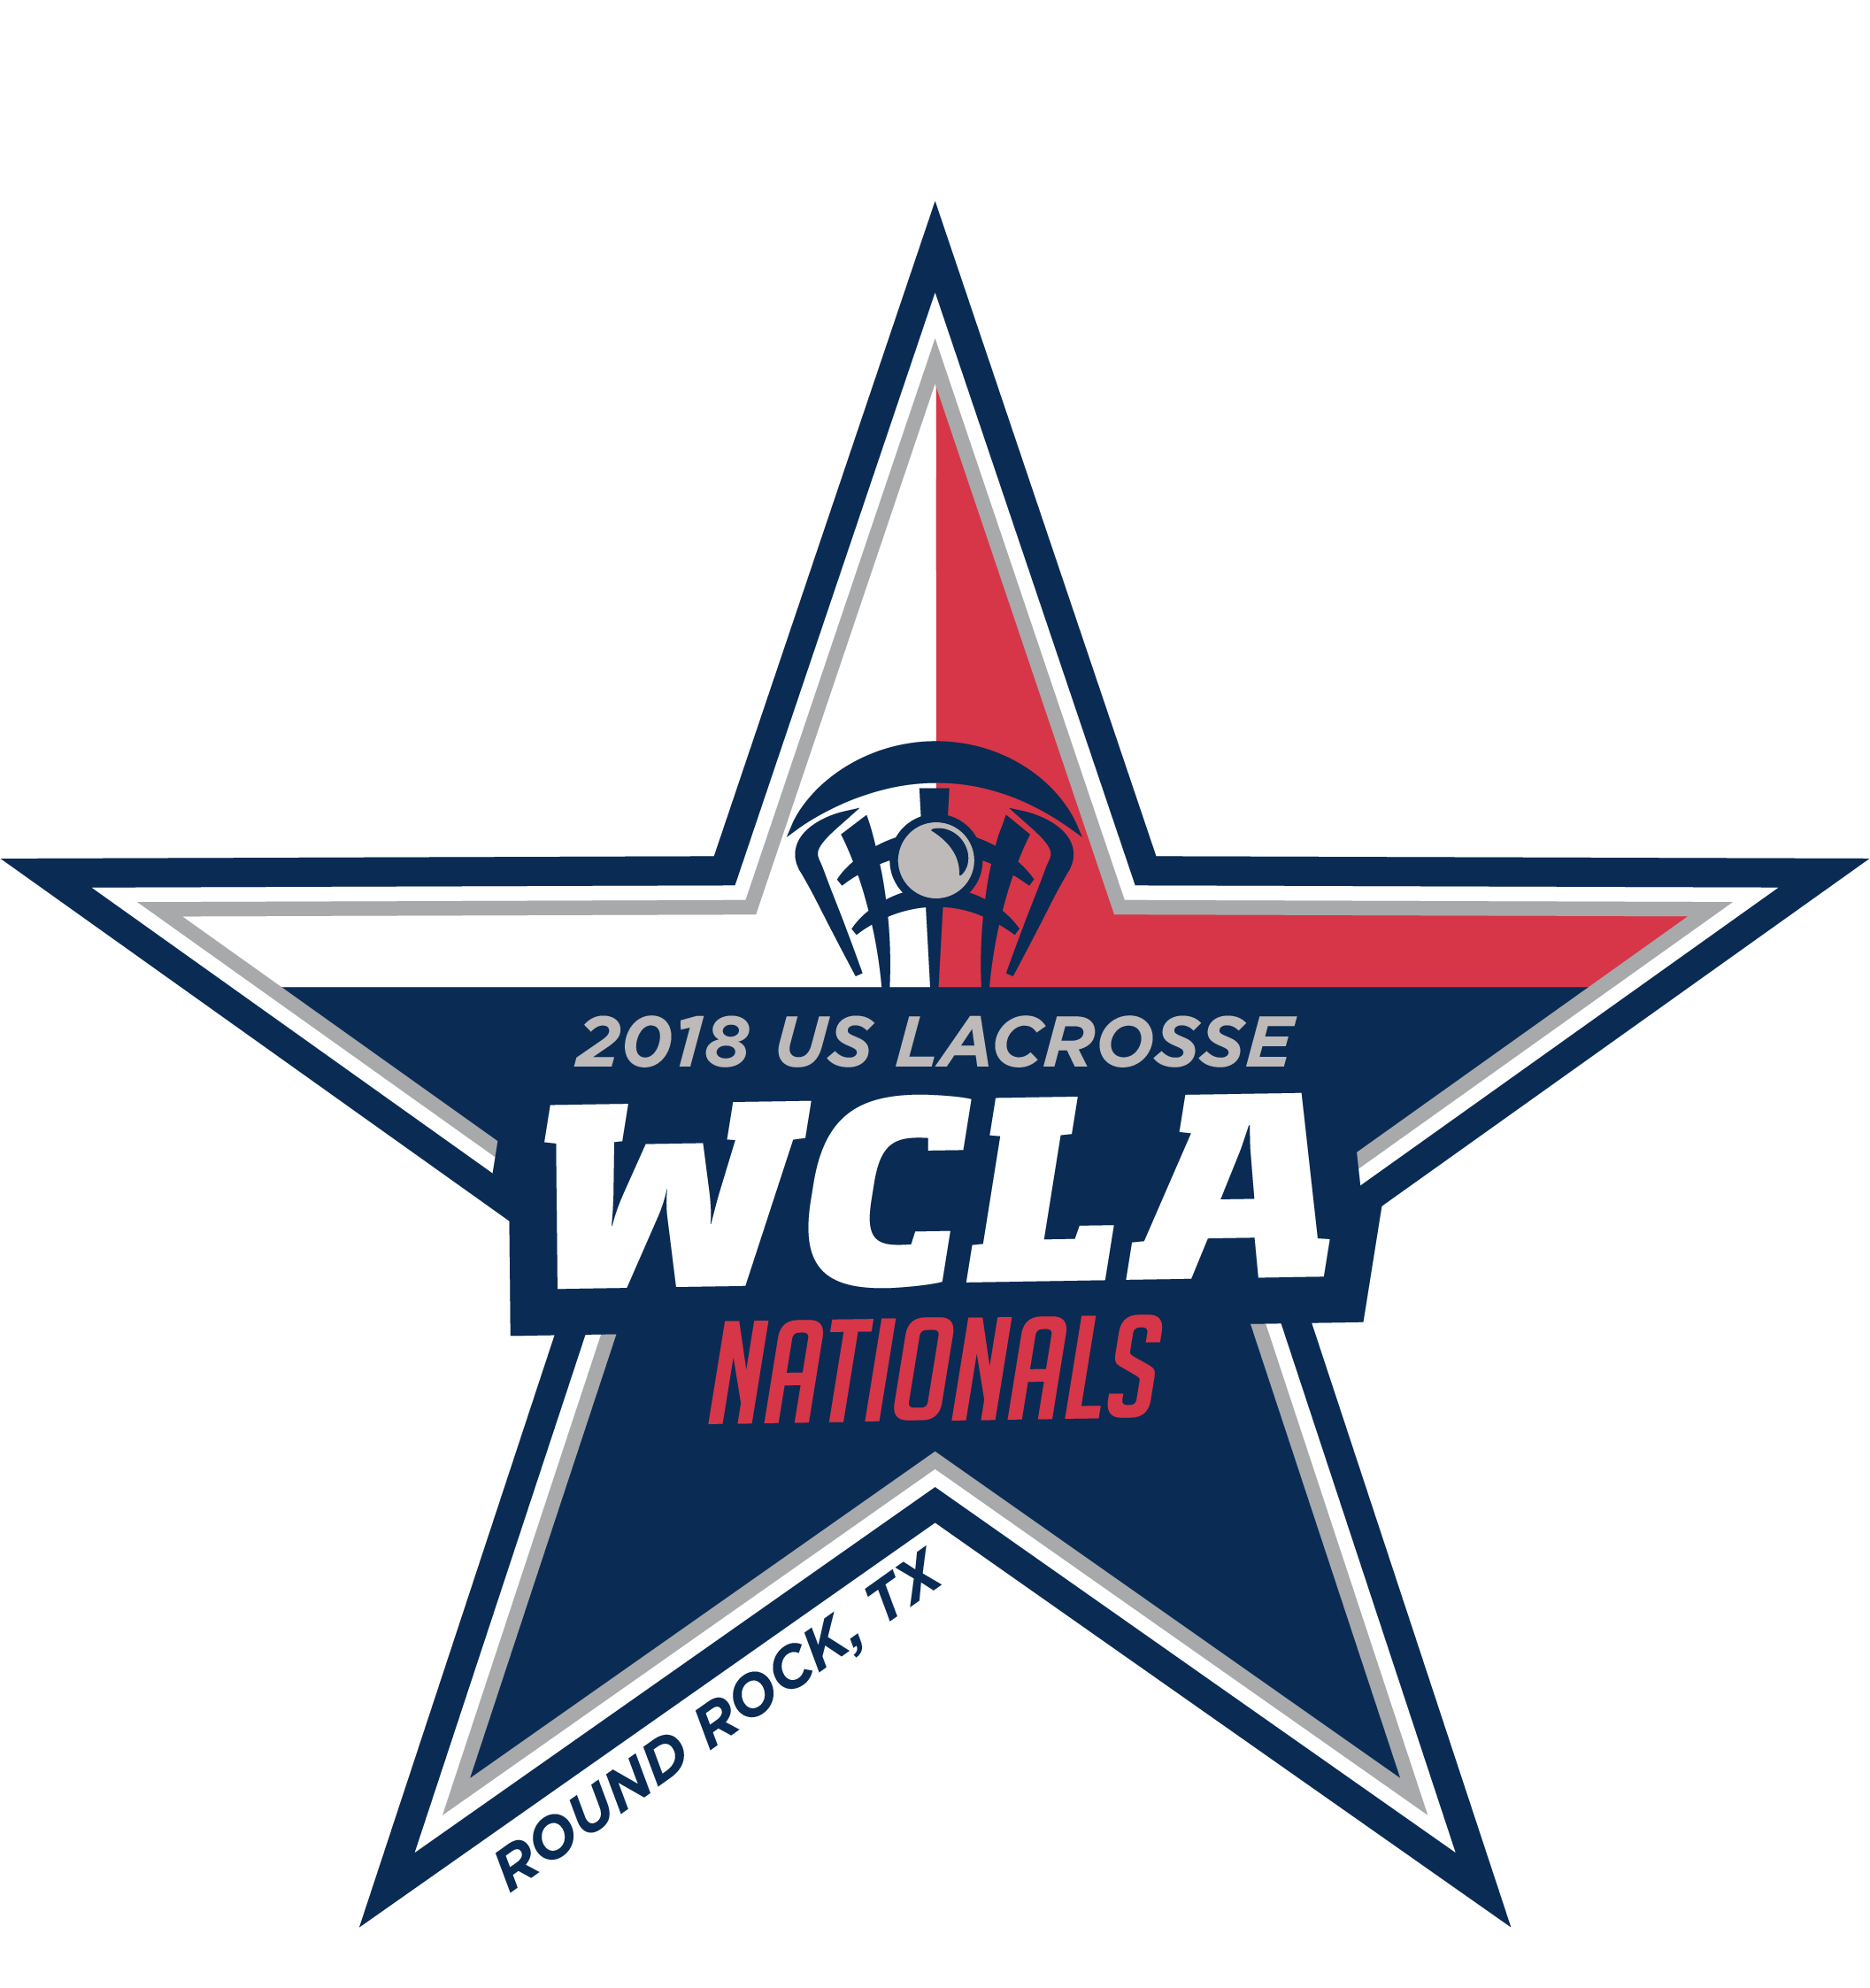 WCLA 2018 National Championships Round Rock Multipurpose Complex